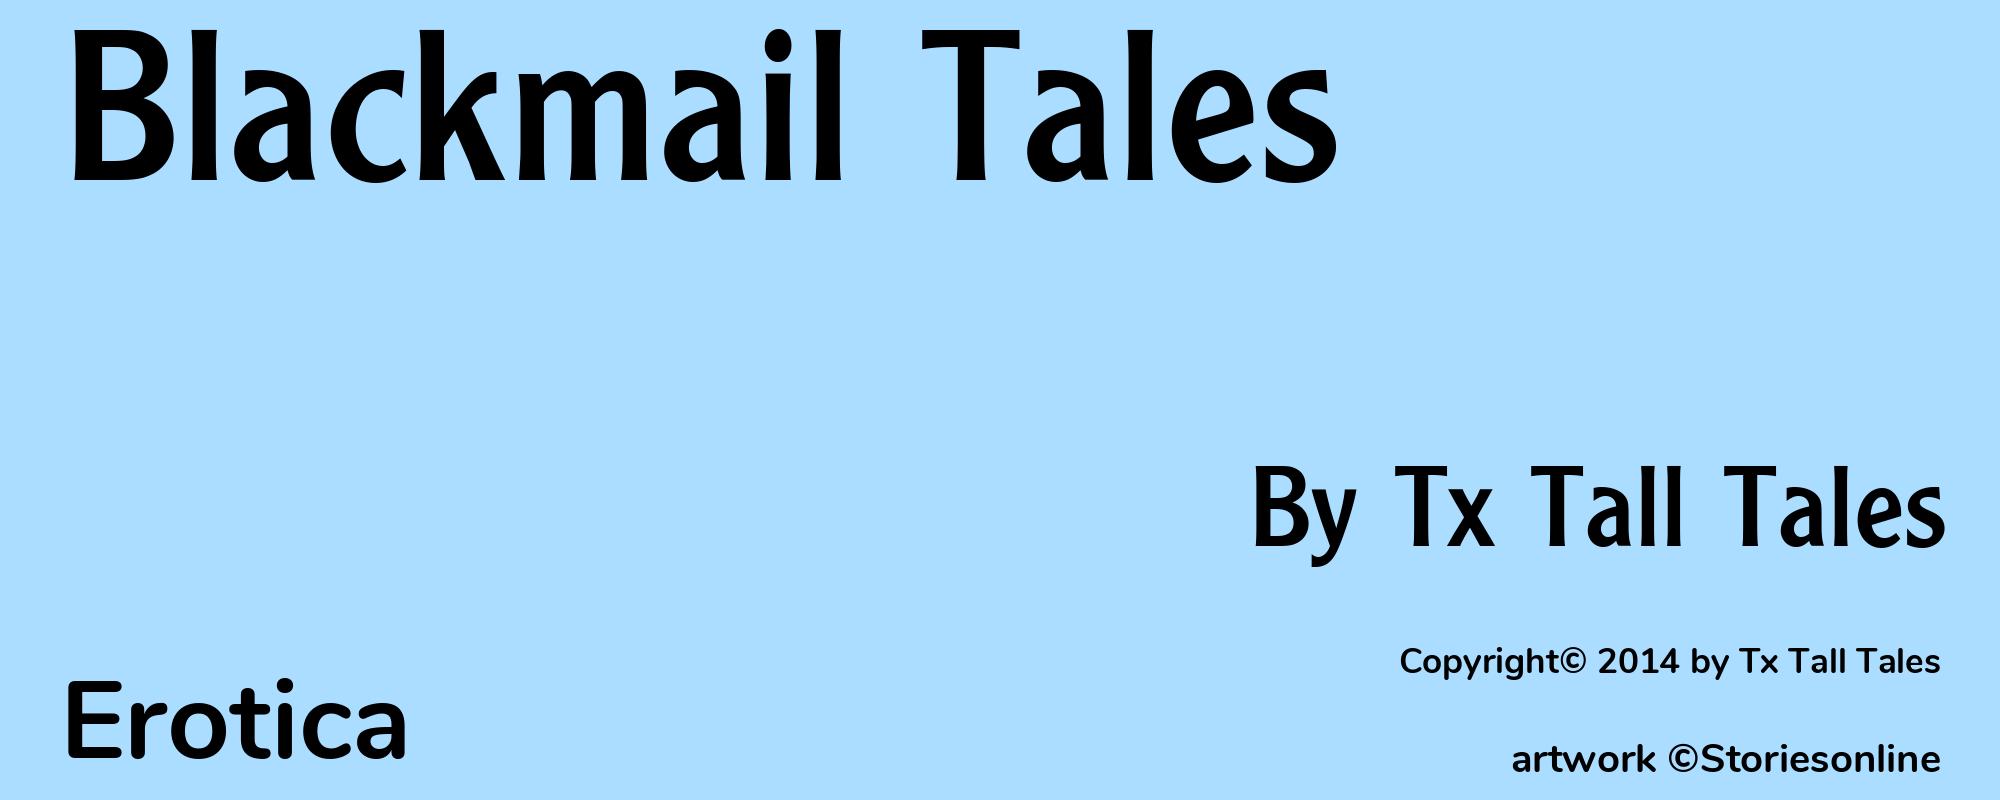 Blackmail Tales - Cover